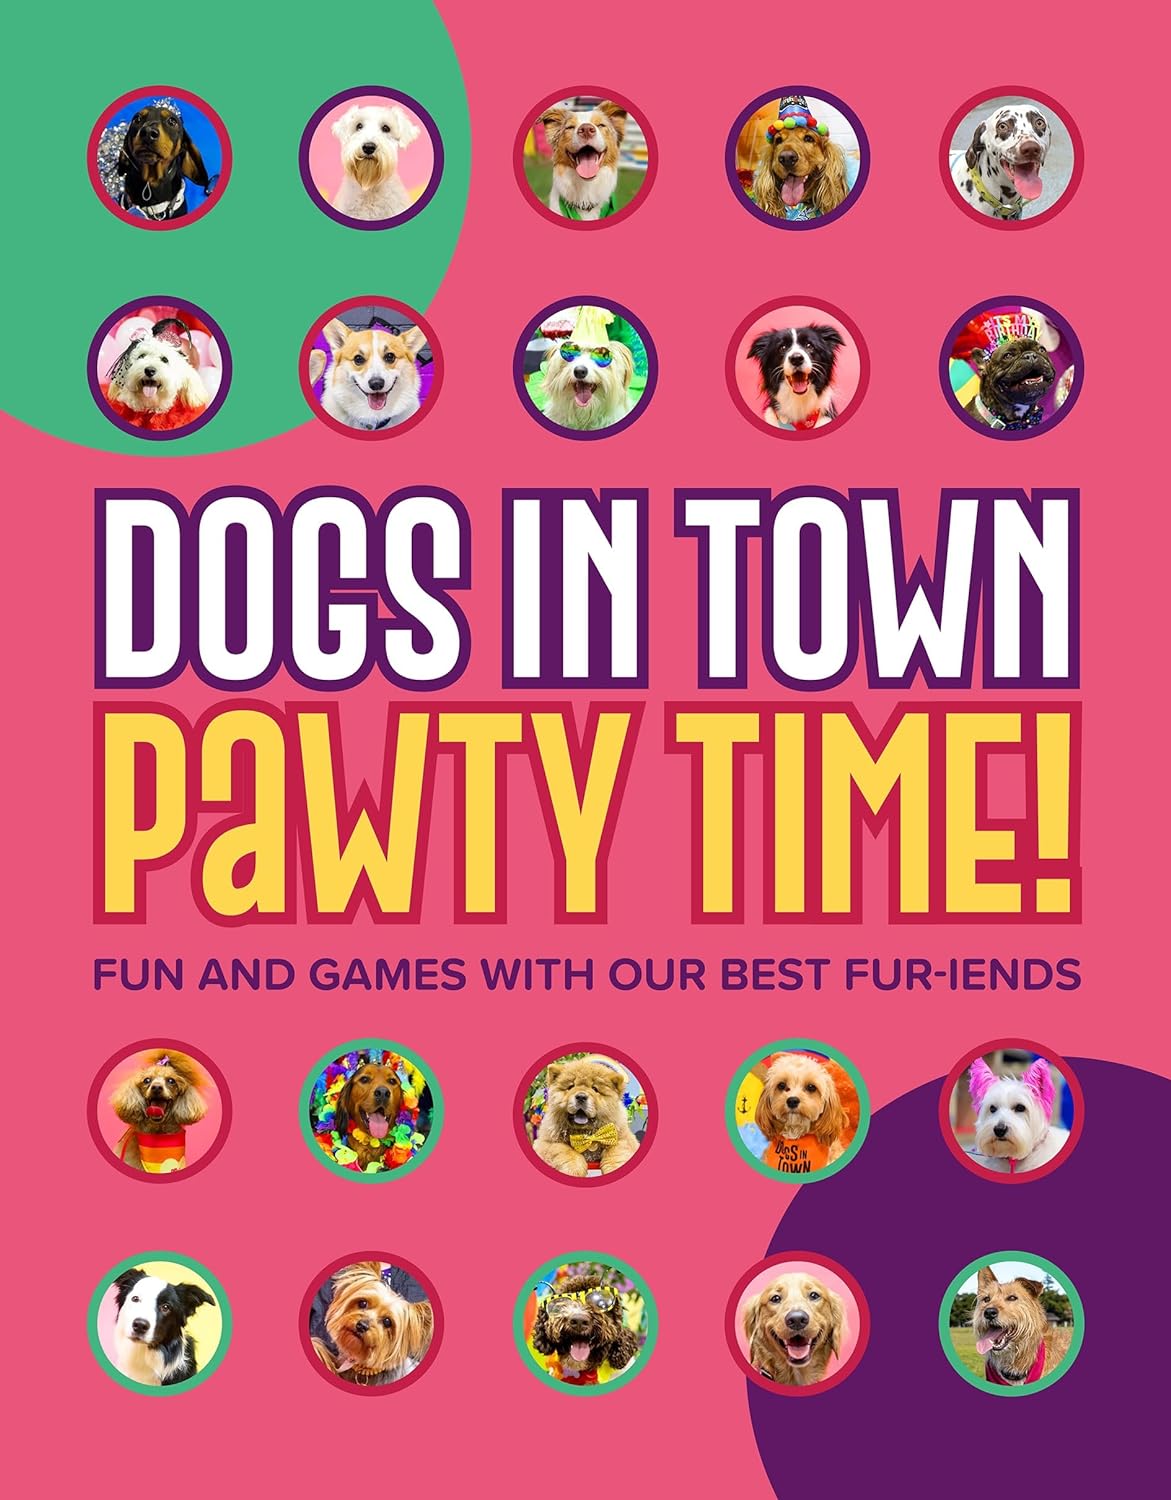 Dogs in Town Book "PAWTY TIME!"